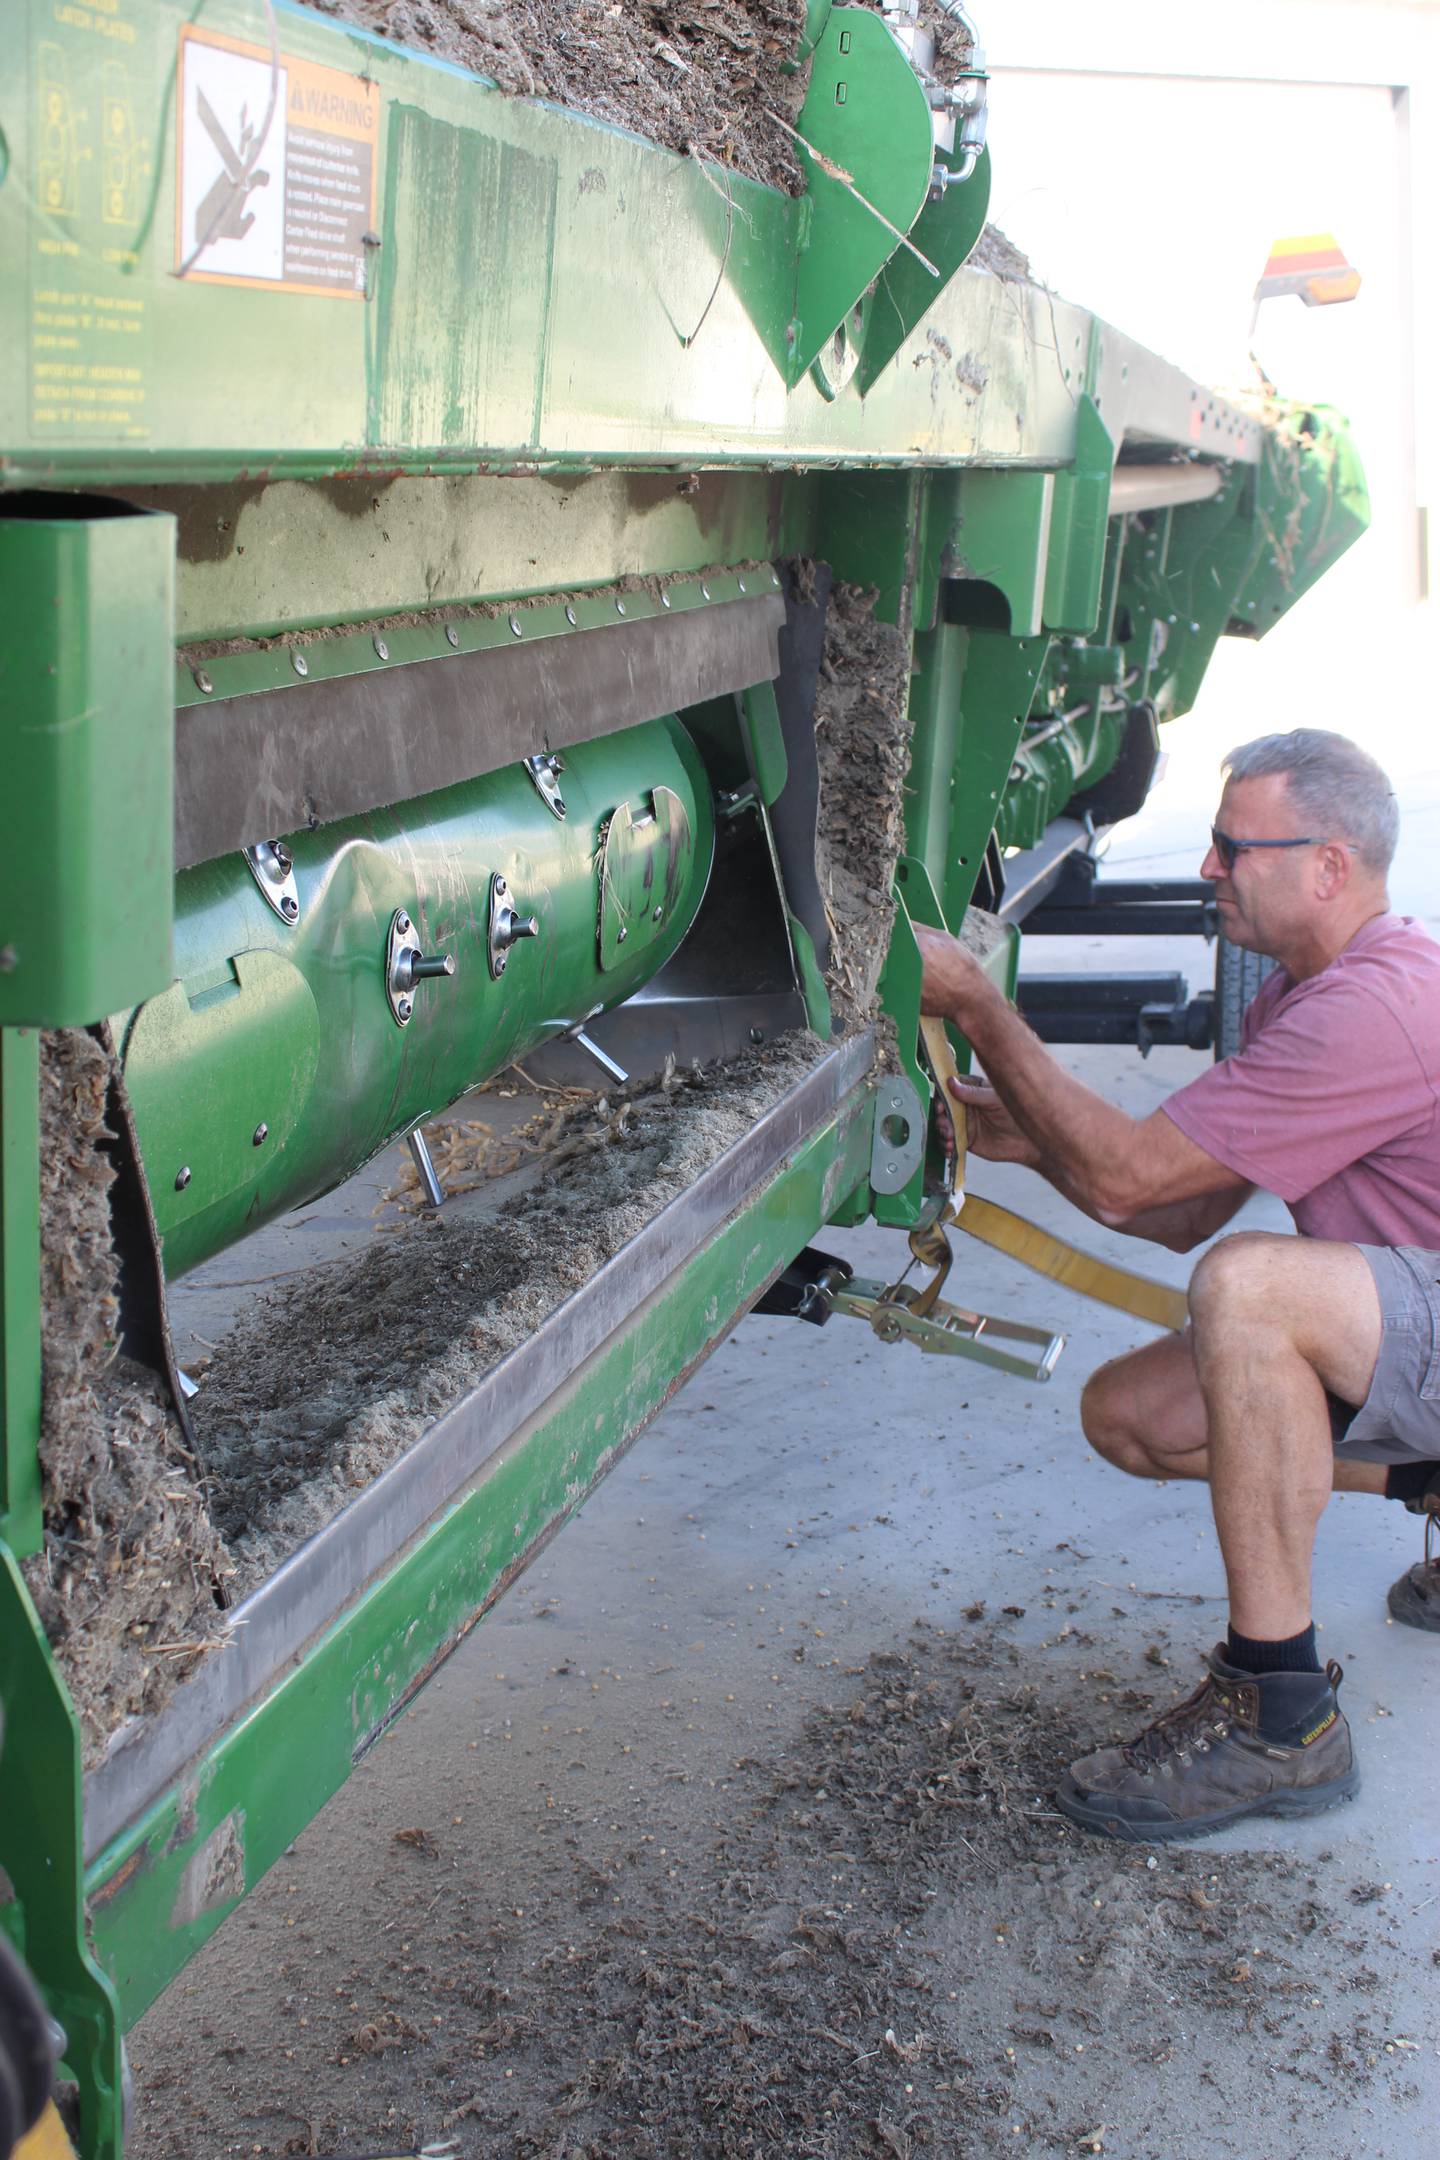 Chris Gould tightens the straps on the head mover in preparation to travel to the next soybean field on his farm in Maple Park, Illinois. He started harvest this year on Sept. 30, about a week behind most years.